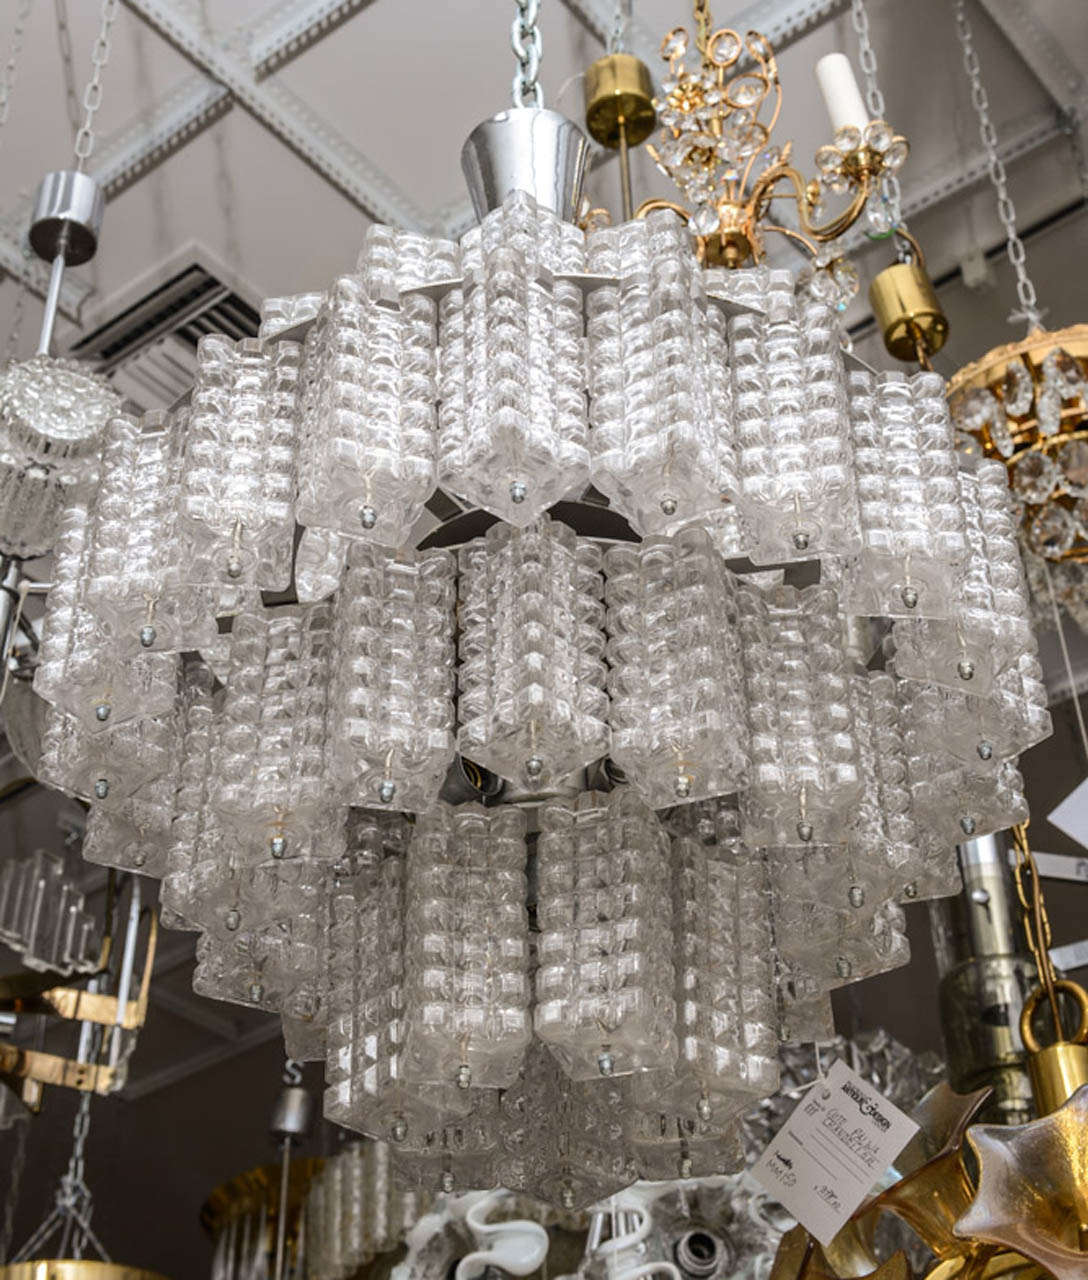 High polished chrome Kalmar chandelier features 4 tiers of clear single hung textured rectangular glass columns.